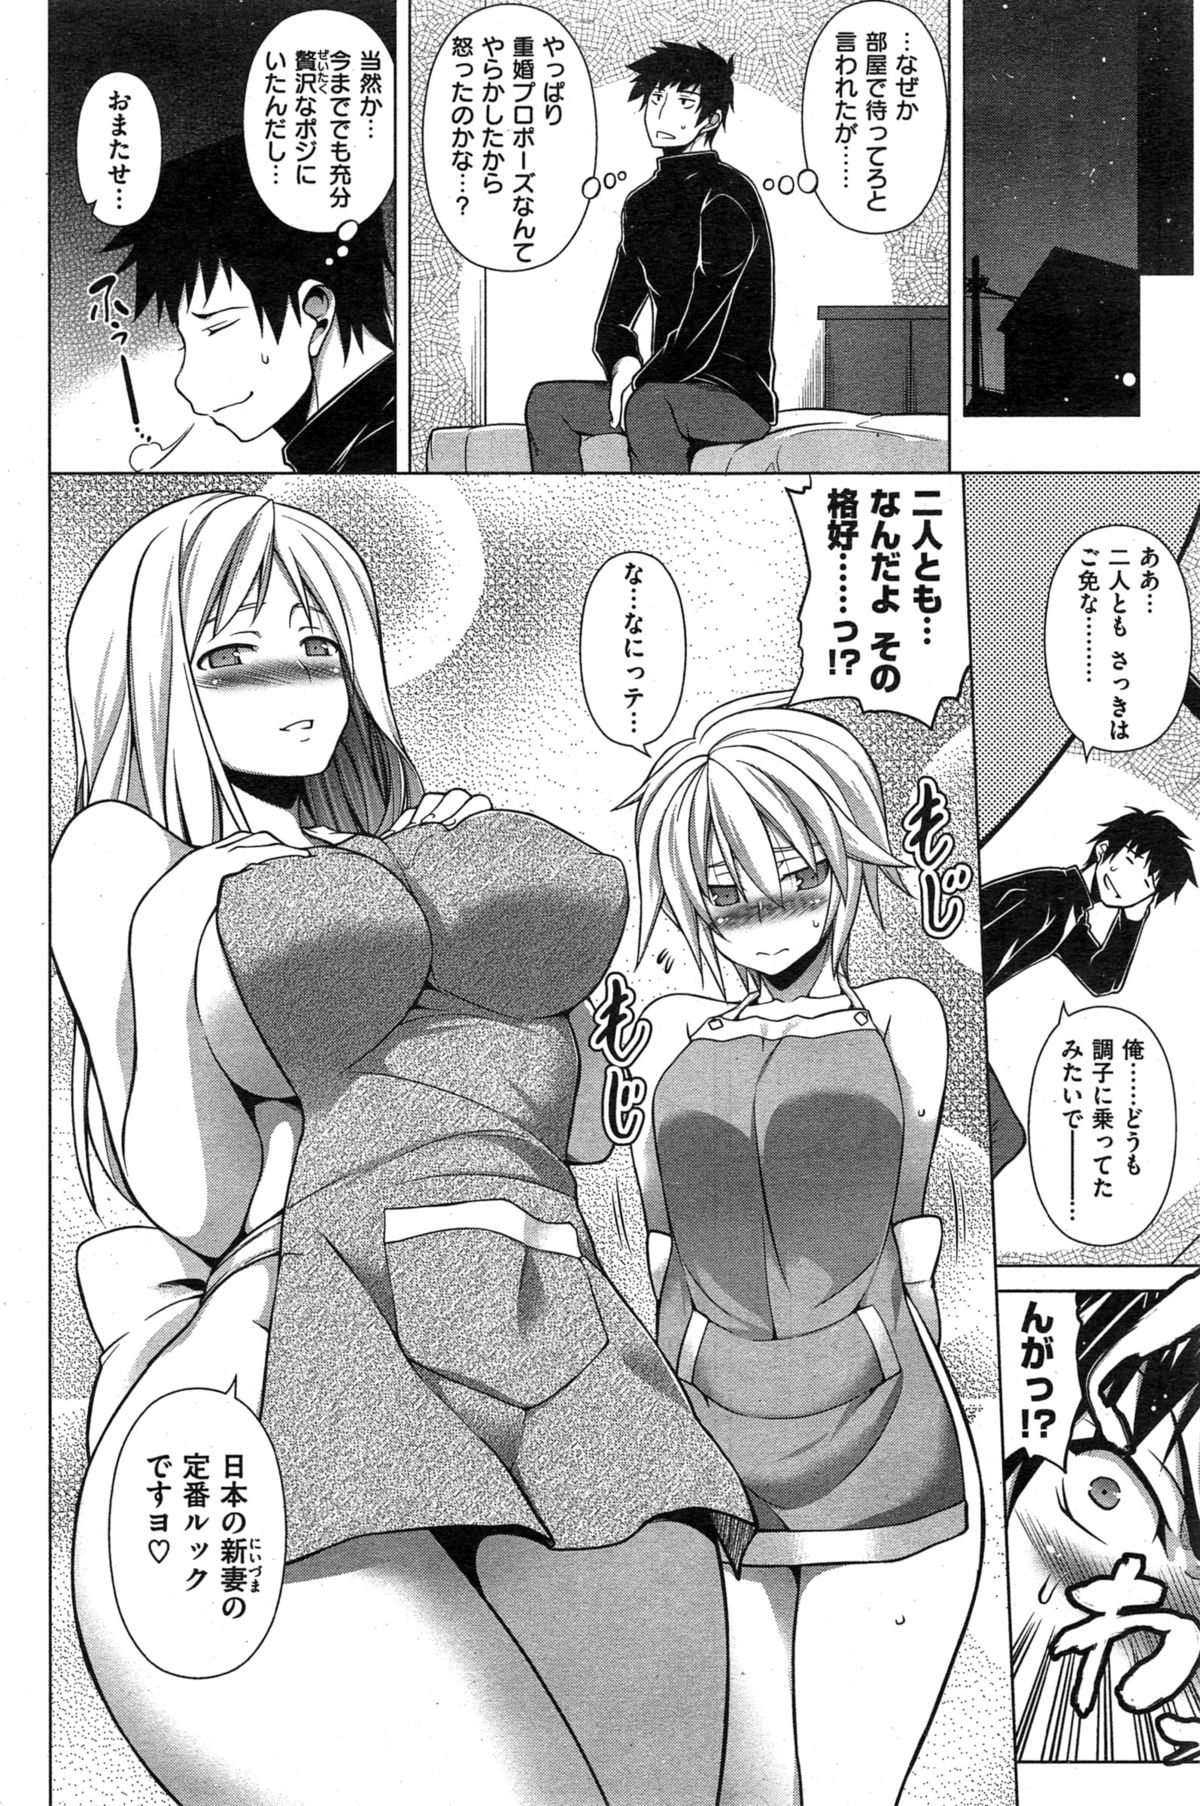 [TANABE] Ougon Taiken - Gold Experience page 24 full